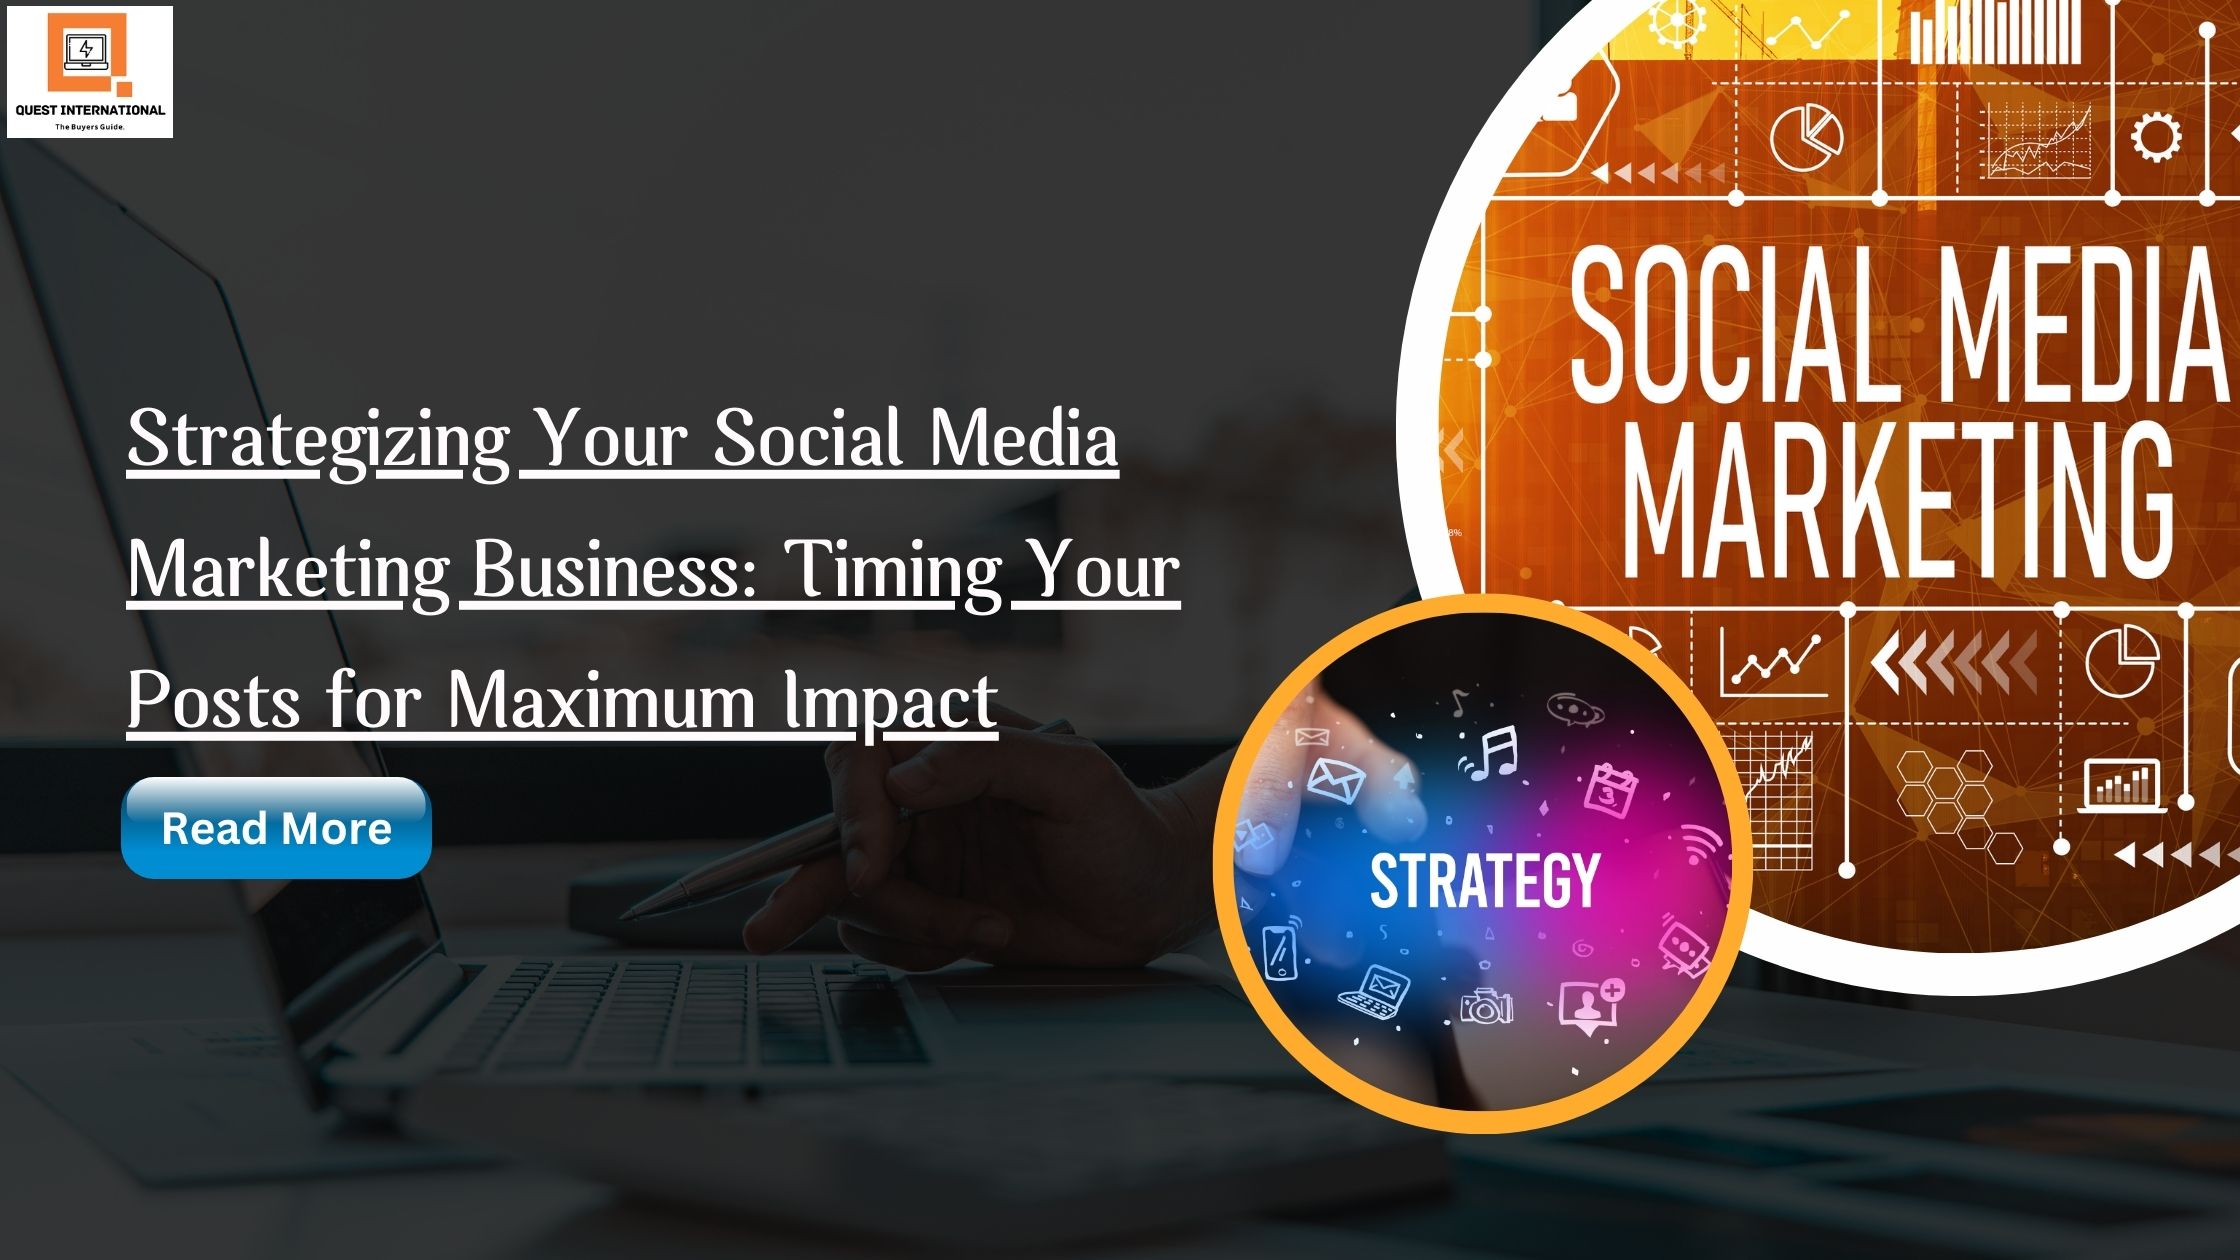 You are currently viewing Strategizing Your Social Media Marketing Business: Timing Your Posts for Maximum Impact